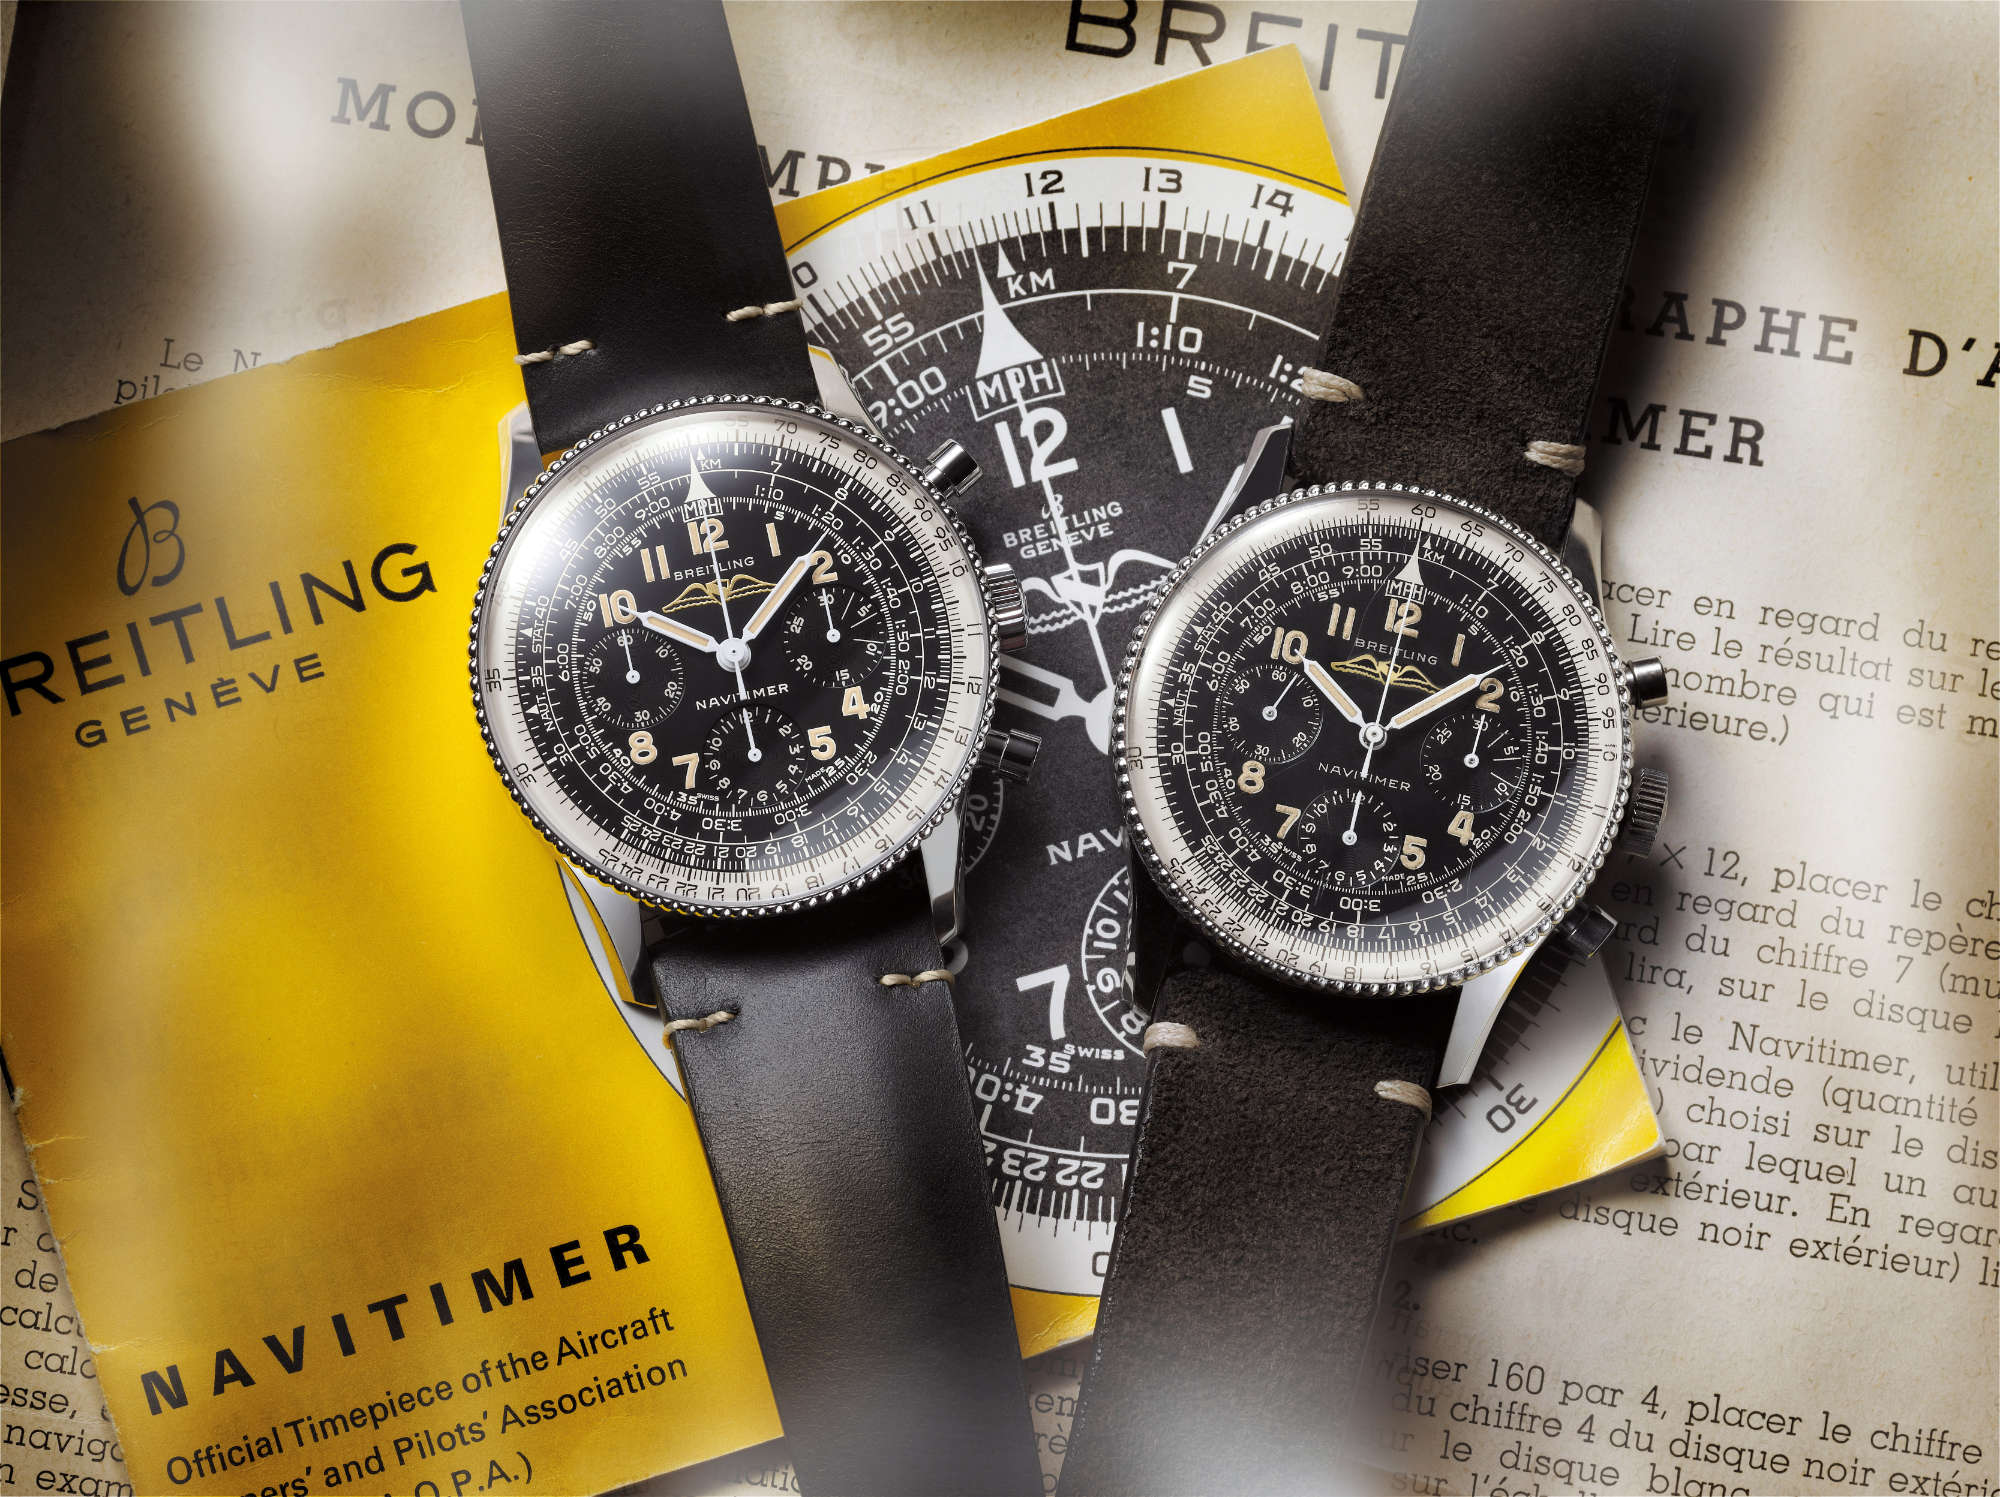 The Navitimer Ref. 806 1959 Re-Edition and, on the right, the original Ref. 806. Credit: Breitling